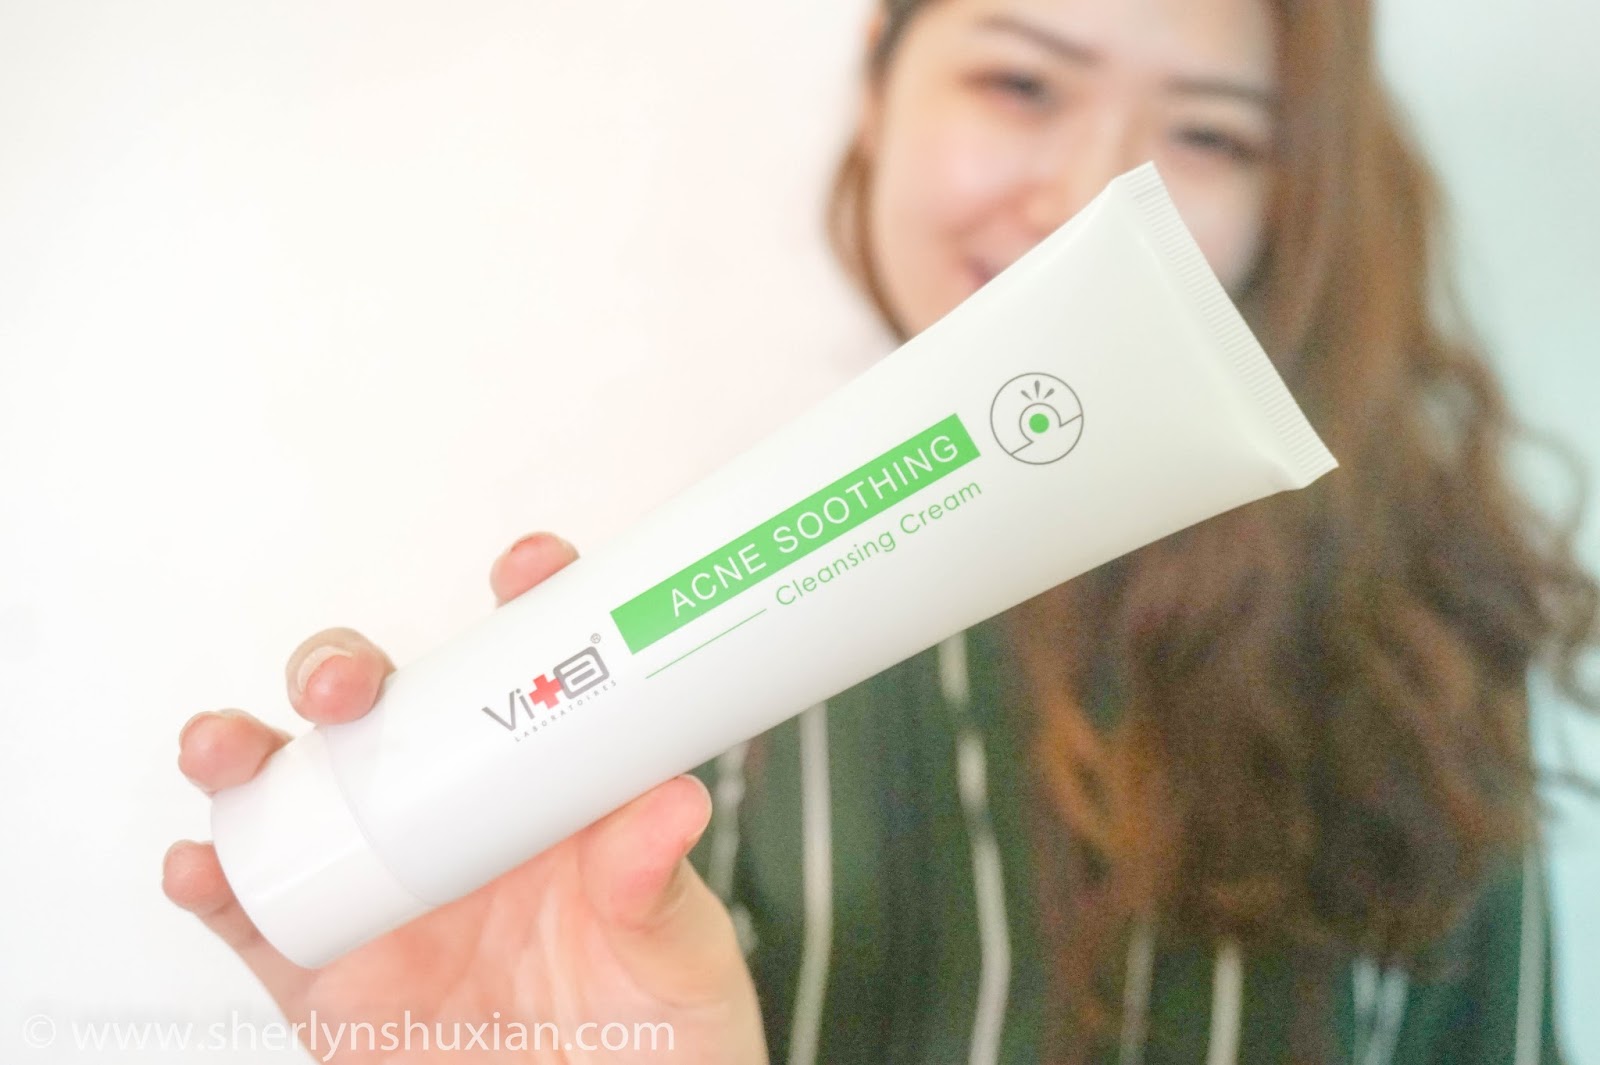 Sherlynshuxian Com Swissvita Acne Soothing Cleansing Cream Micrite Allyoung International Malaysia Sdn Bhd